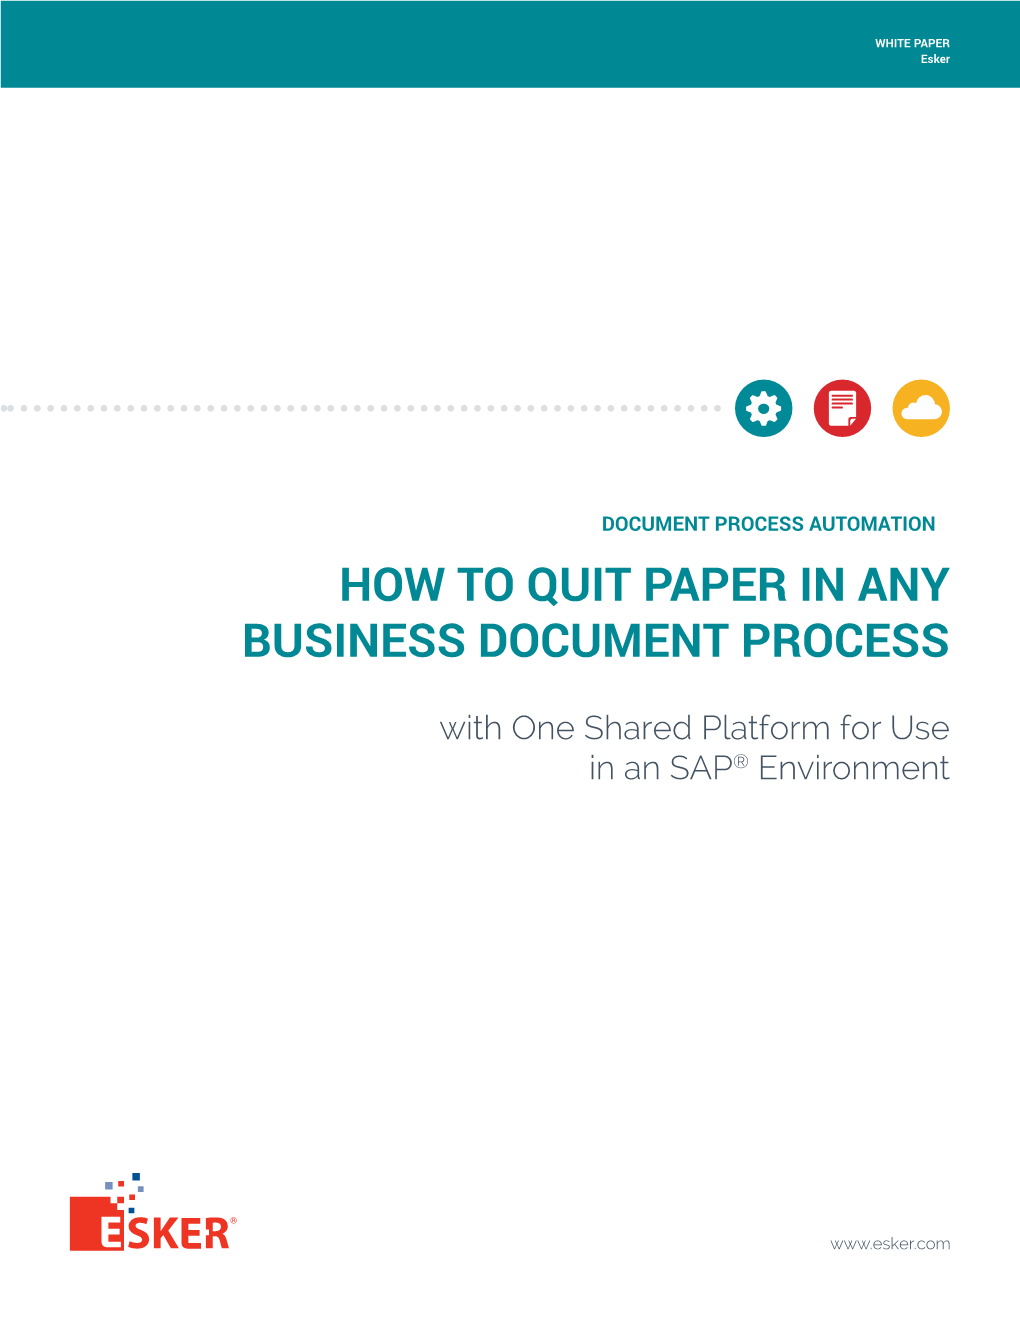 How to Quit Paper in Any Business Document Process